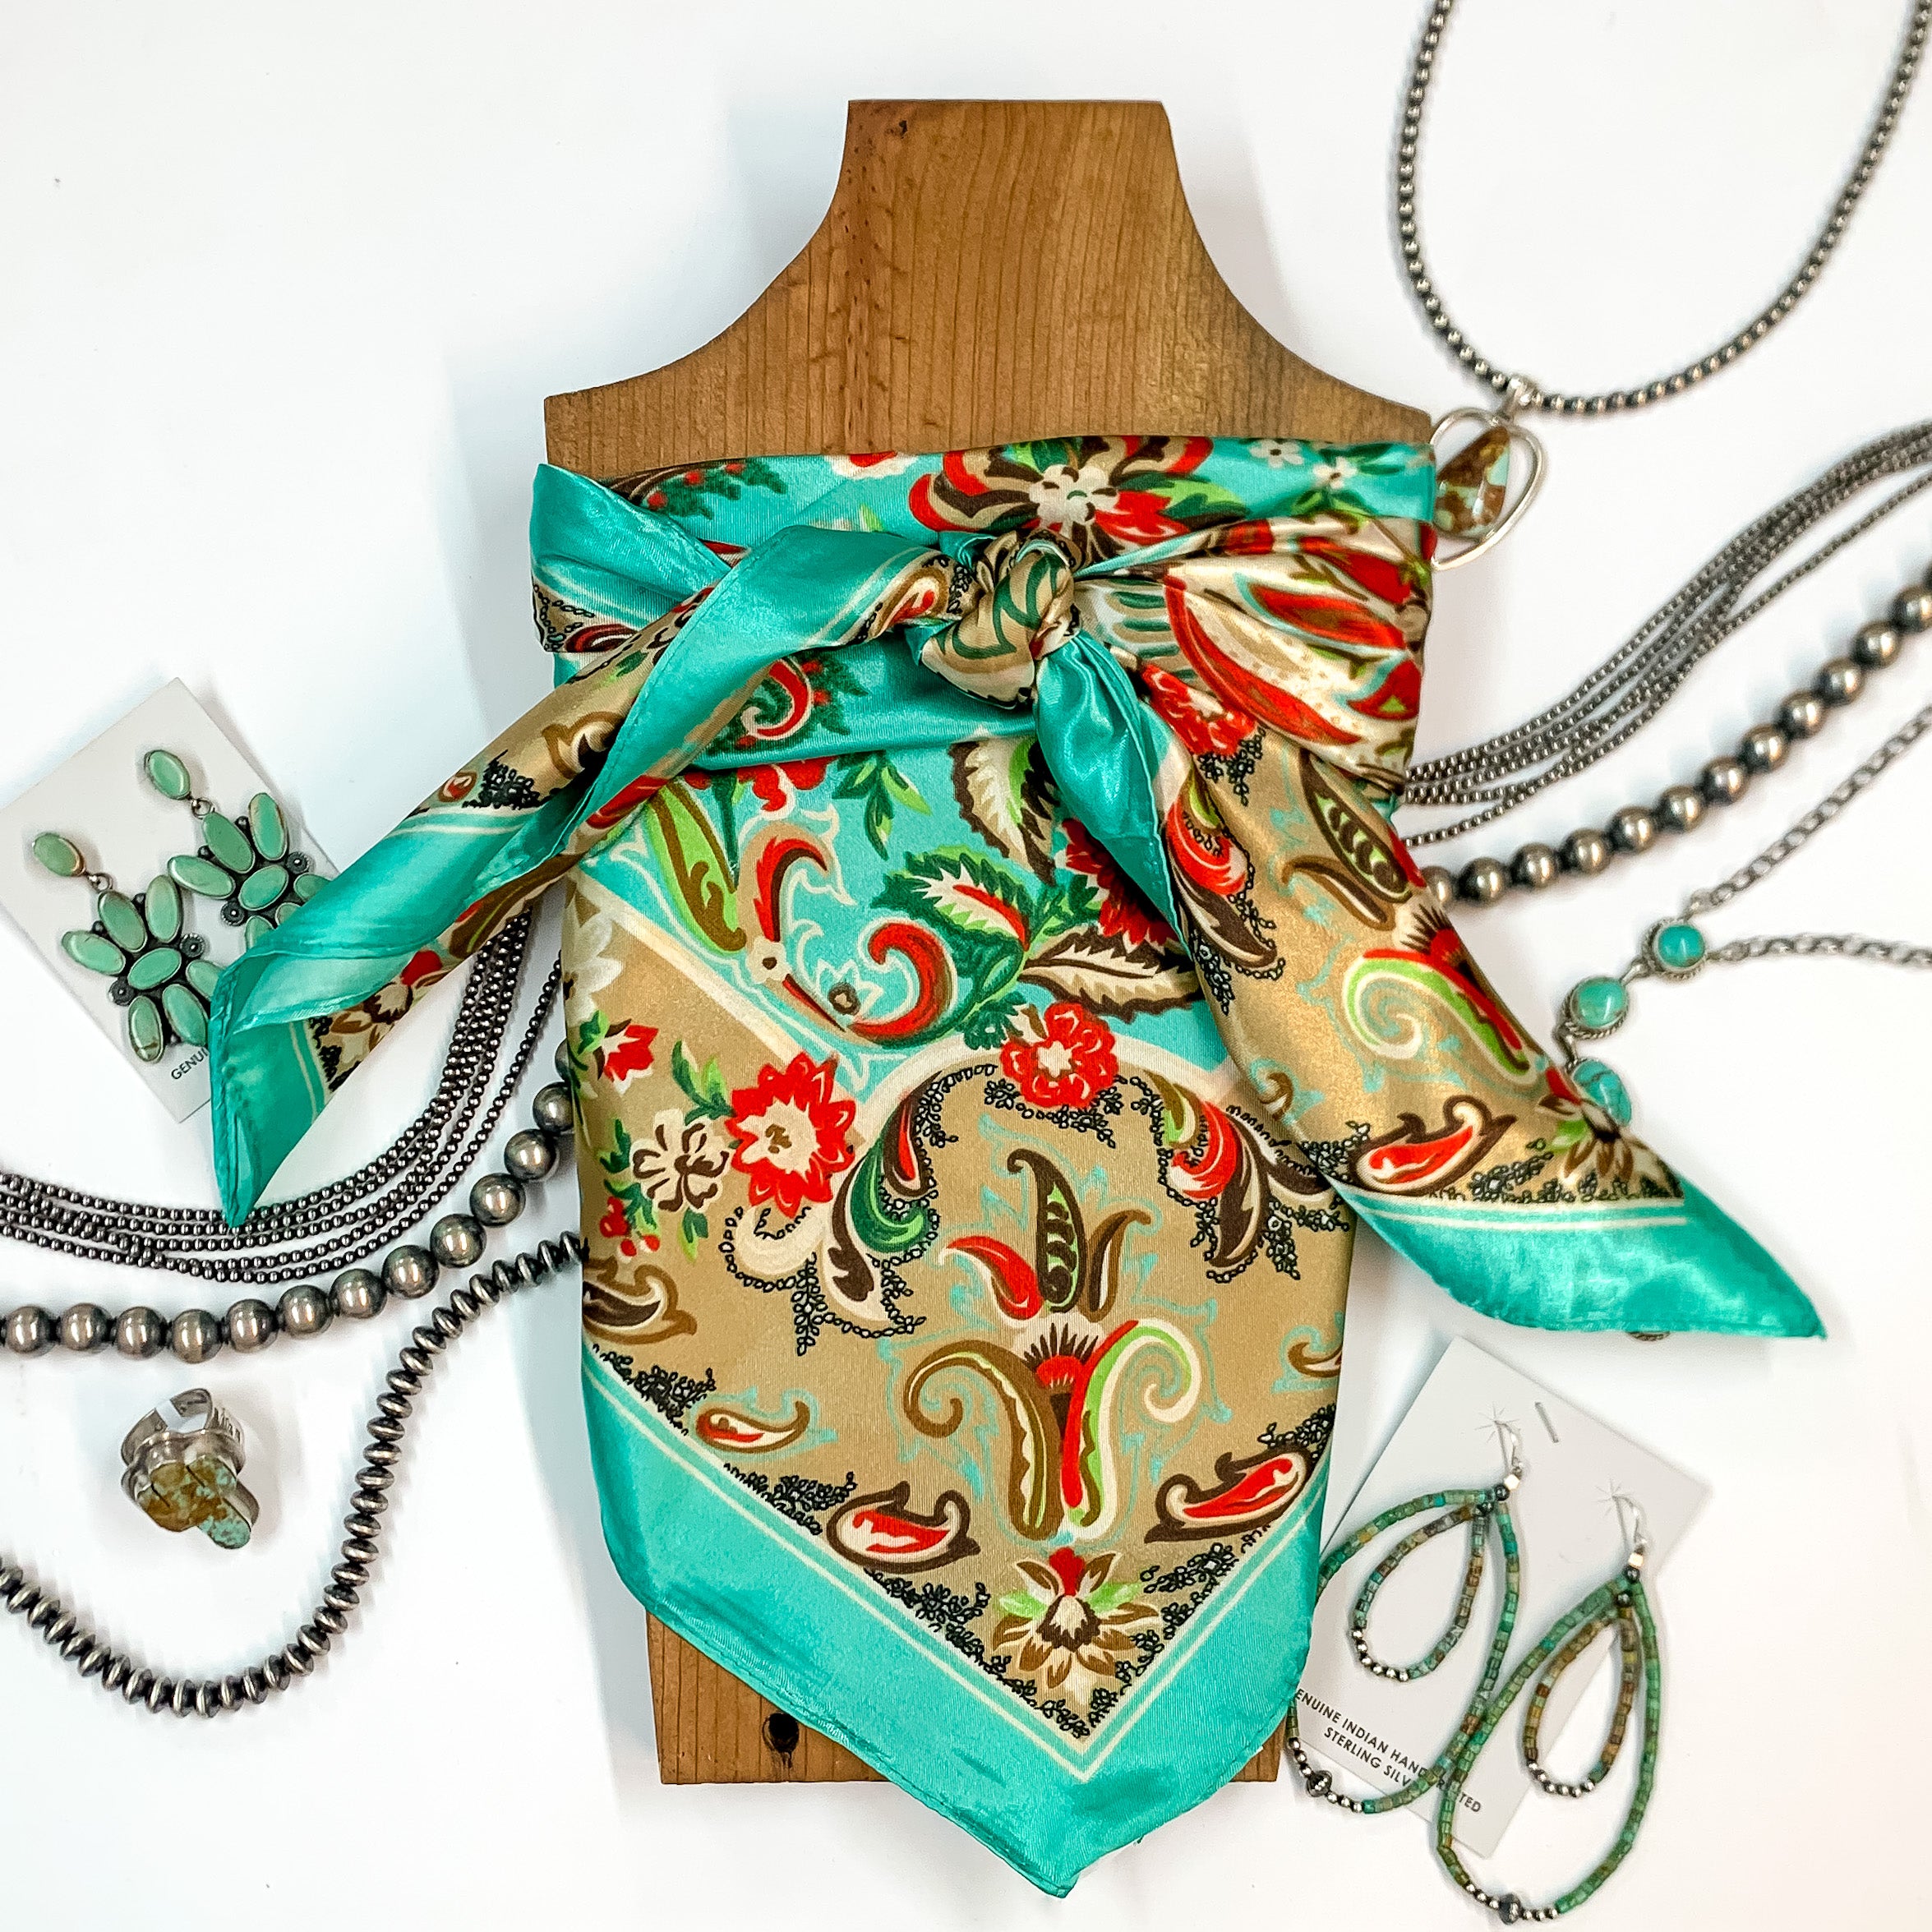 Patterned scarf in Taos Valley. Scarf is tied around a wooden piece. The scarf and piece of wood is pictured on a white background with Navajo jewelry spread out around it.